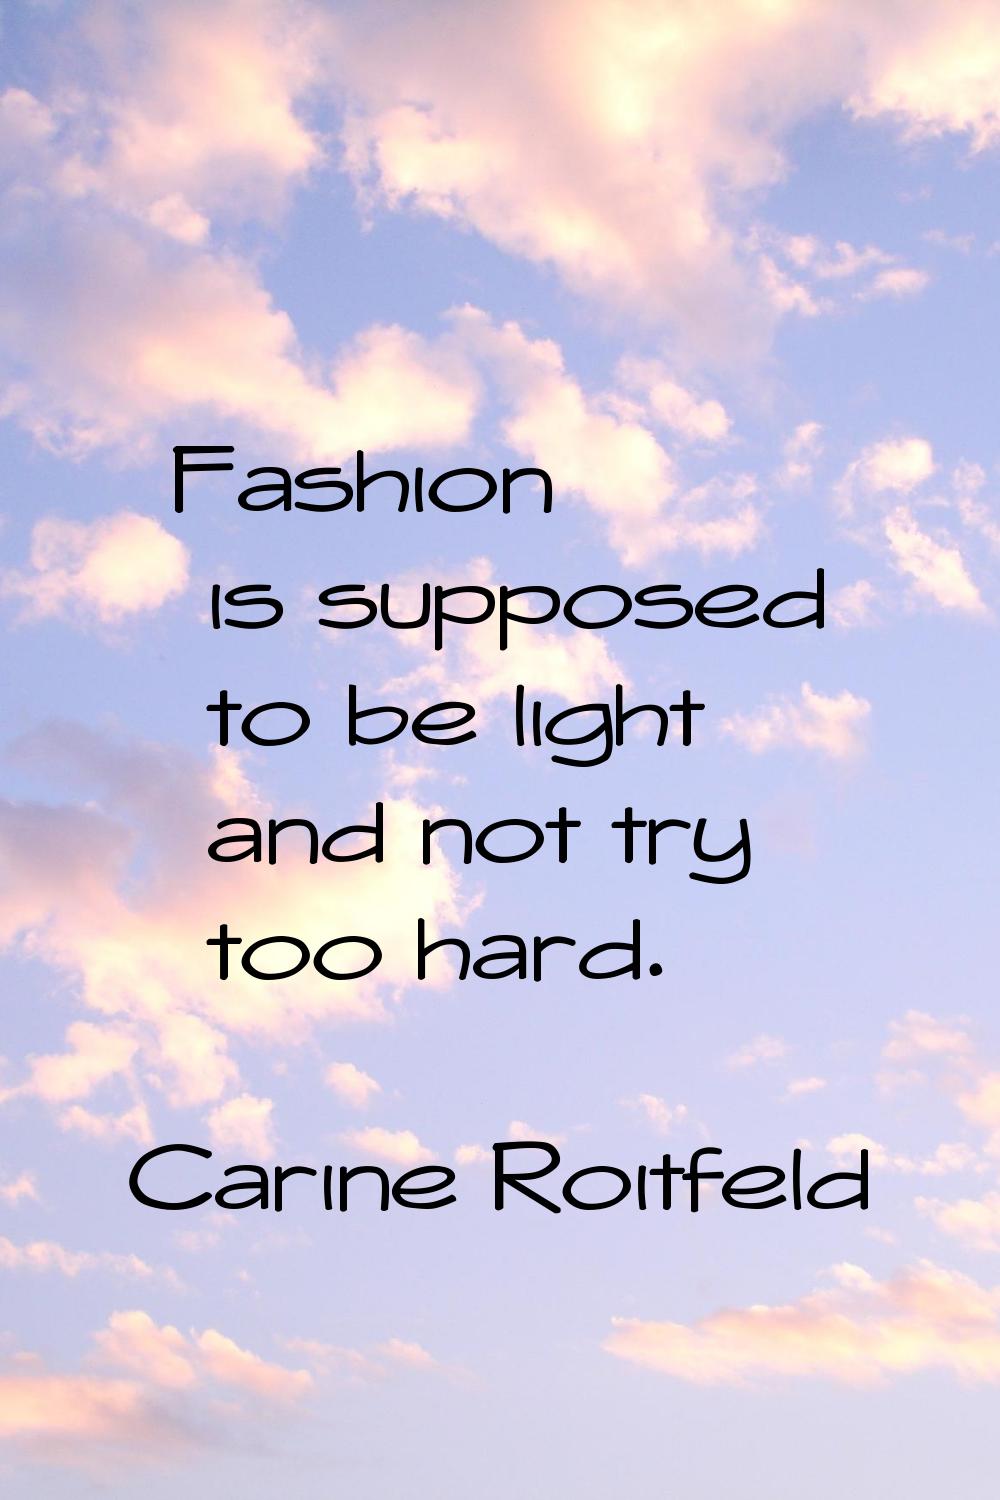 Fashion is supposed to be light and not try too hard.